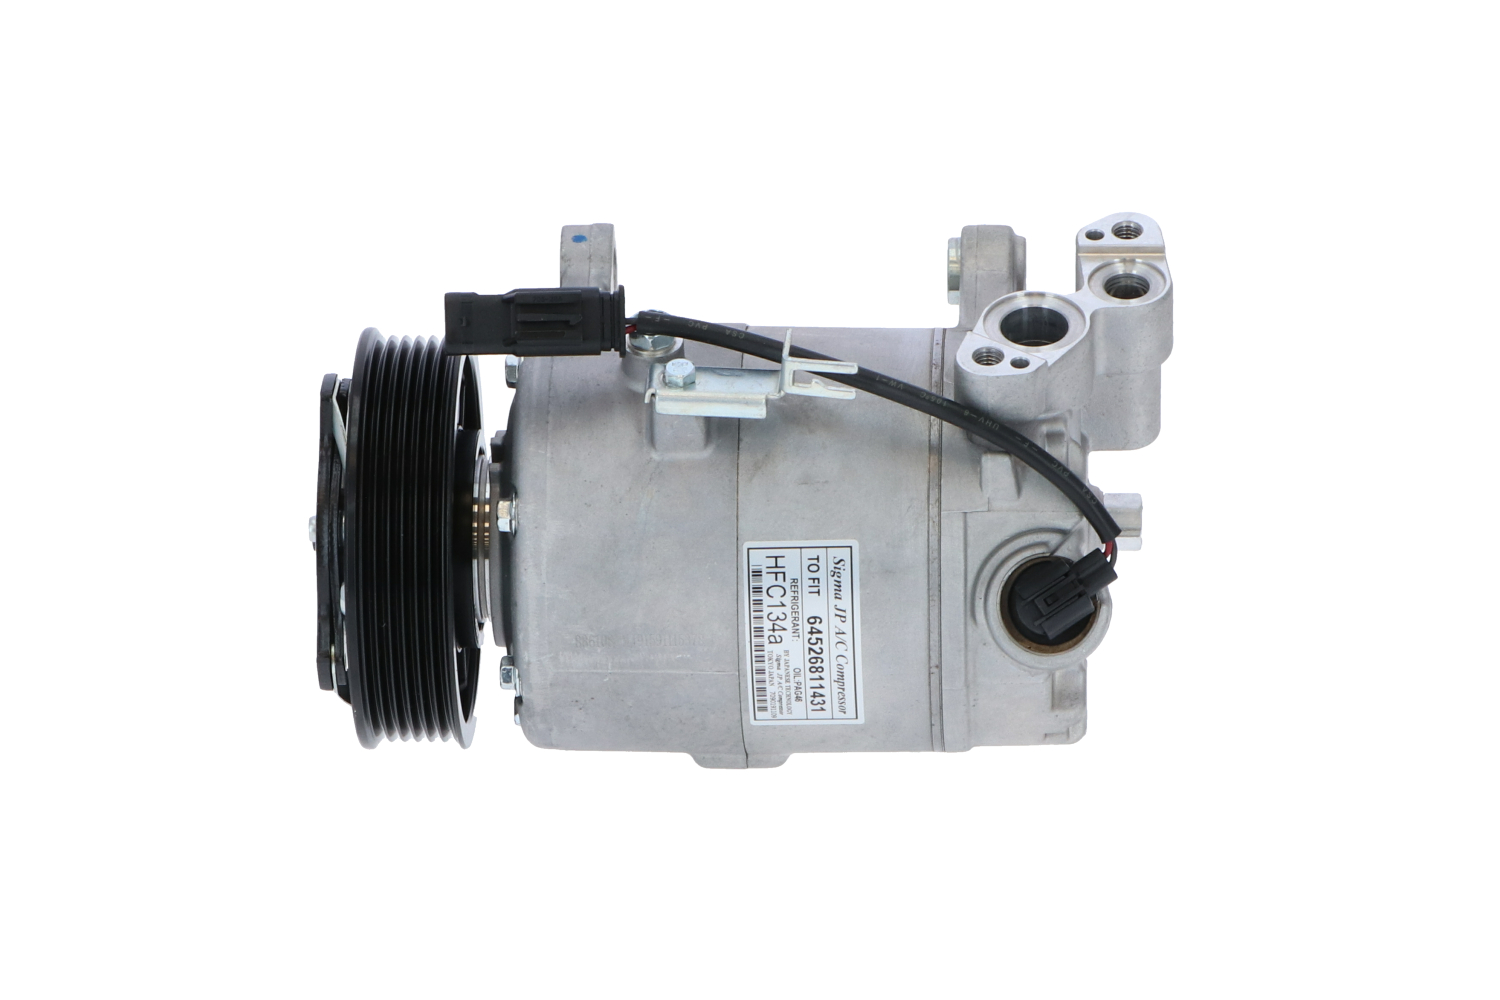 Mini Air conditioning compressor NRF 32980 at a good price